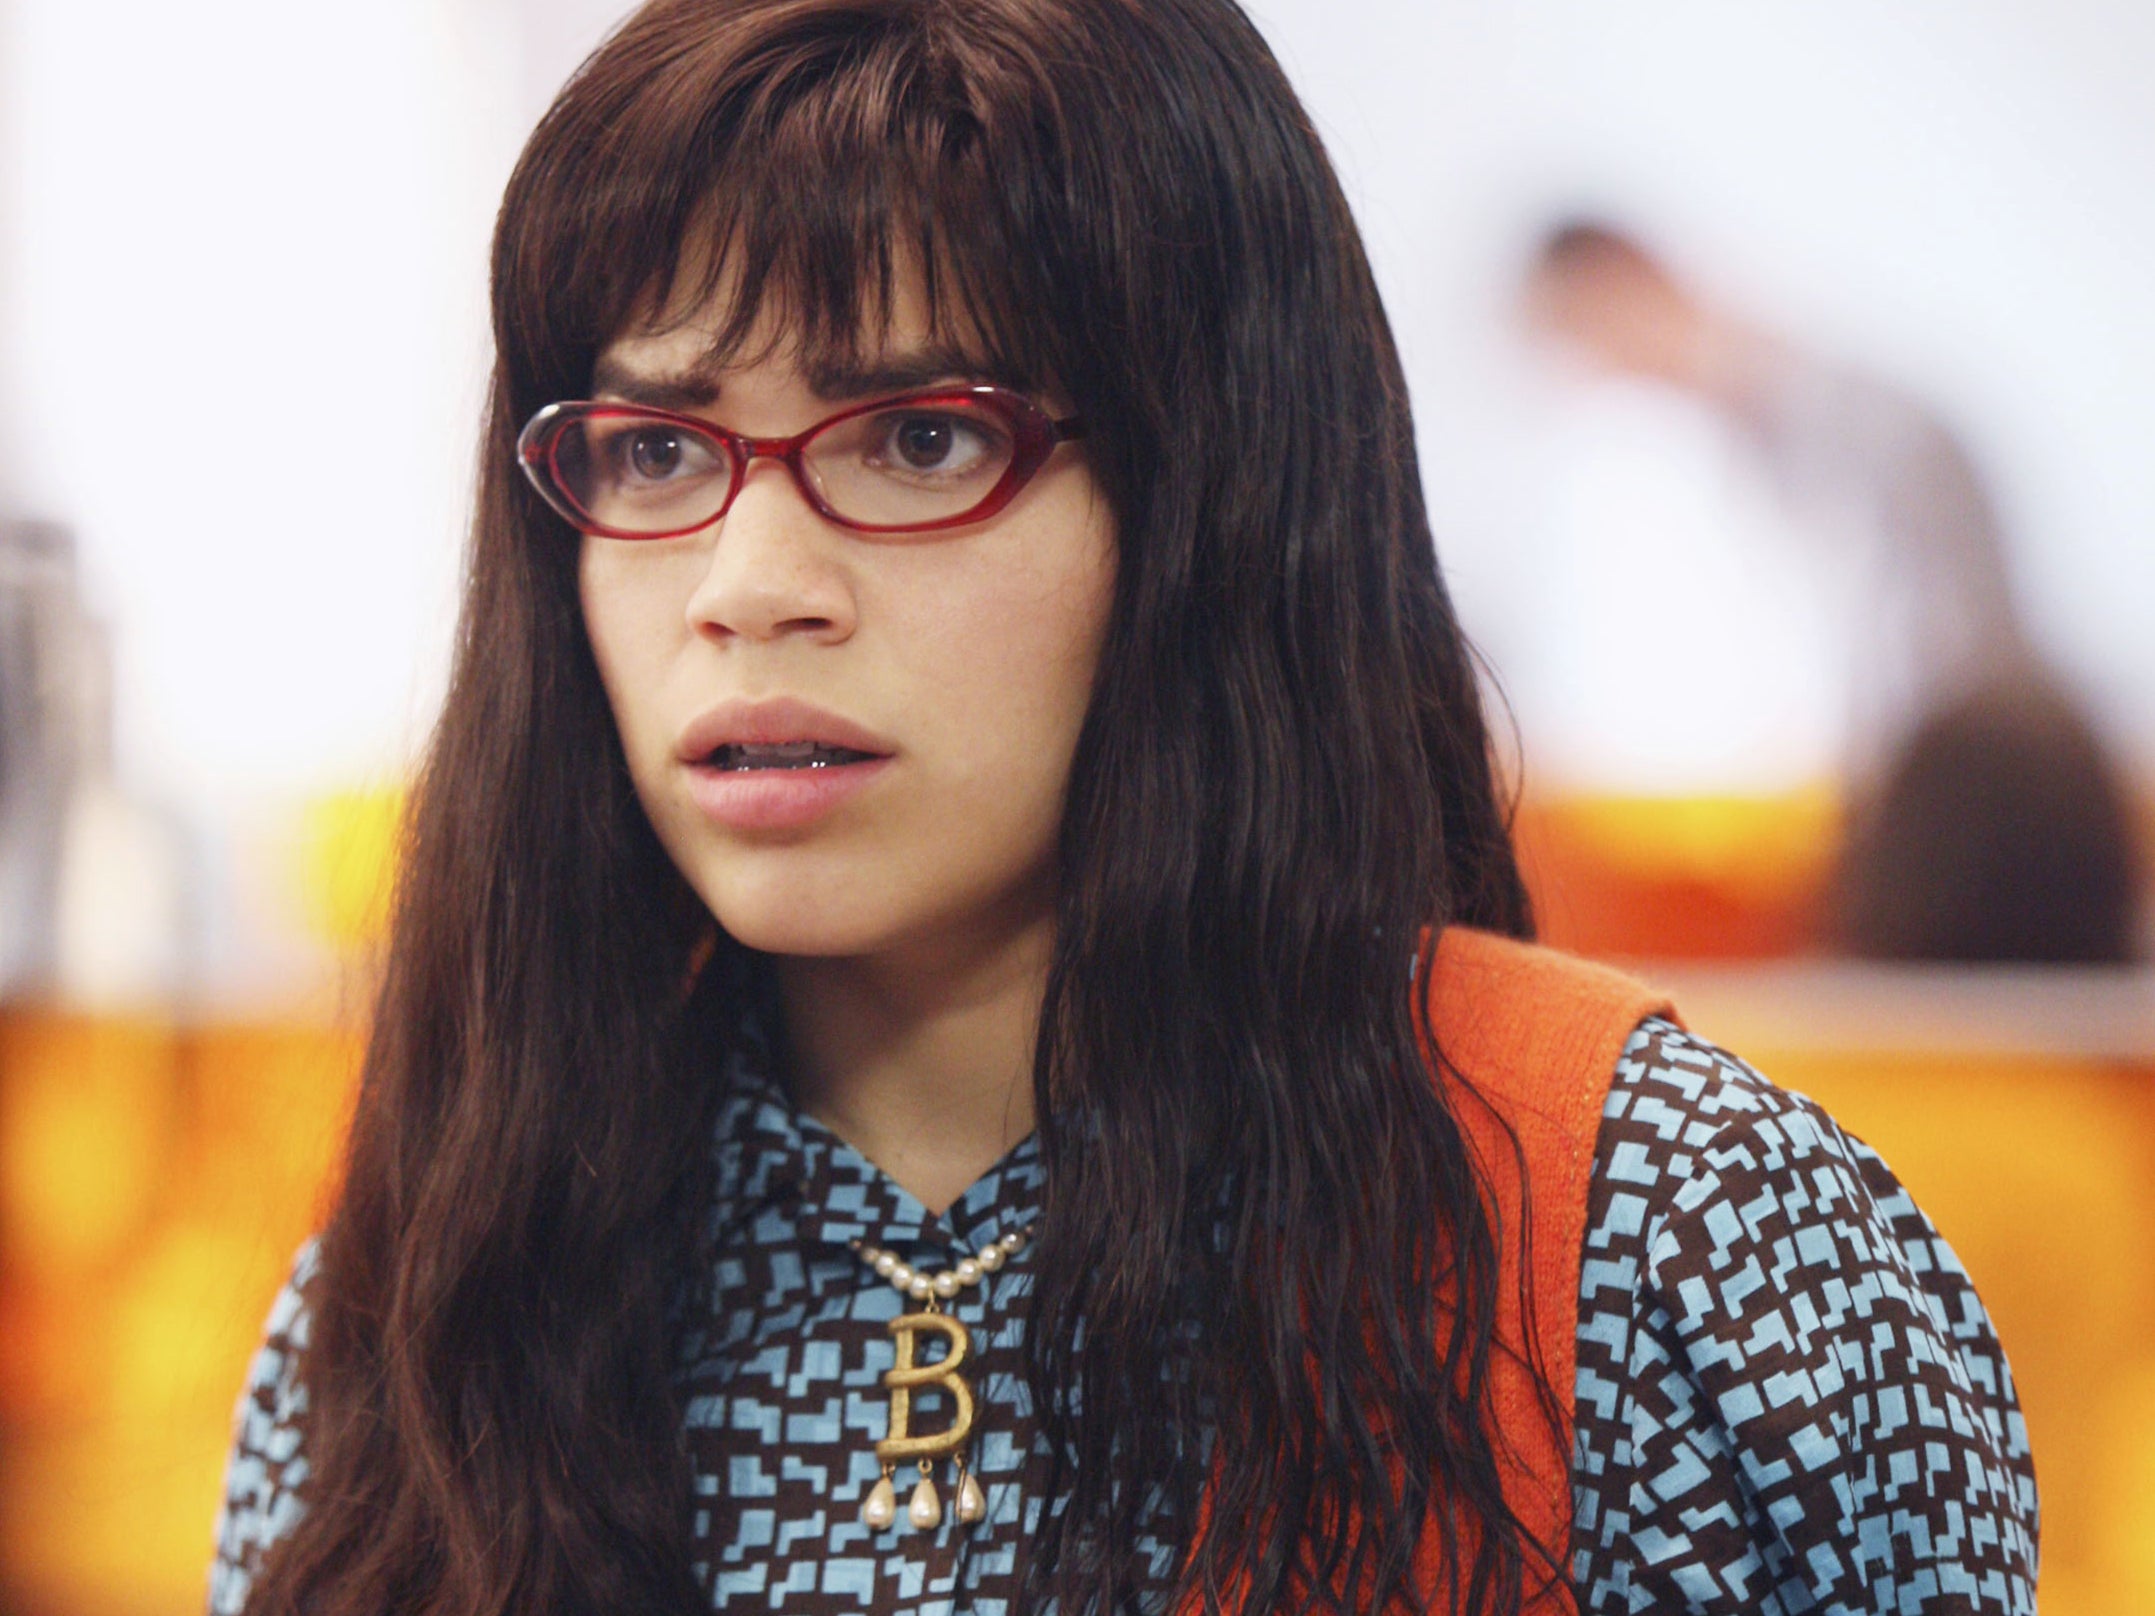 Women wear glasses on TV either to show the character is plain or clever. Ugly Betty, for example